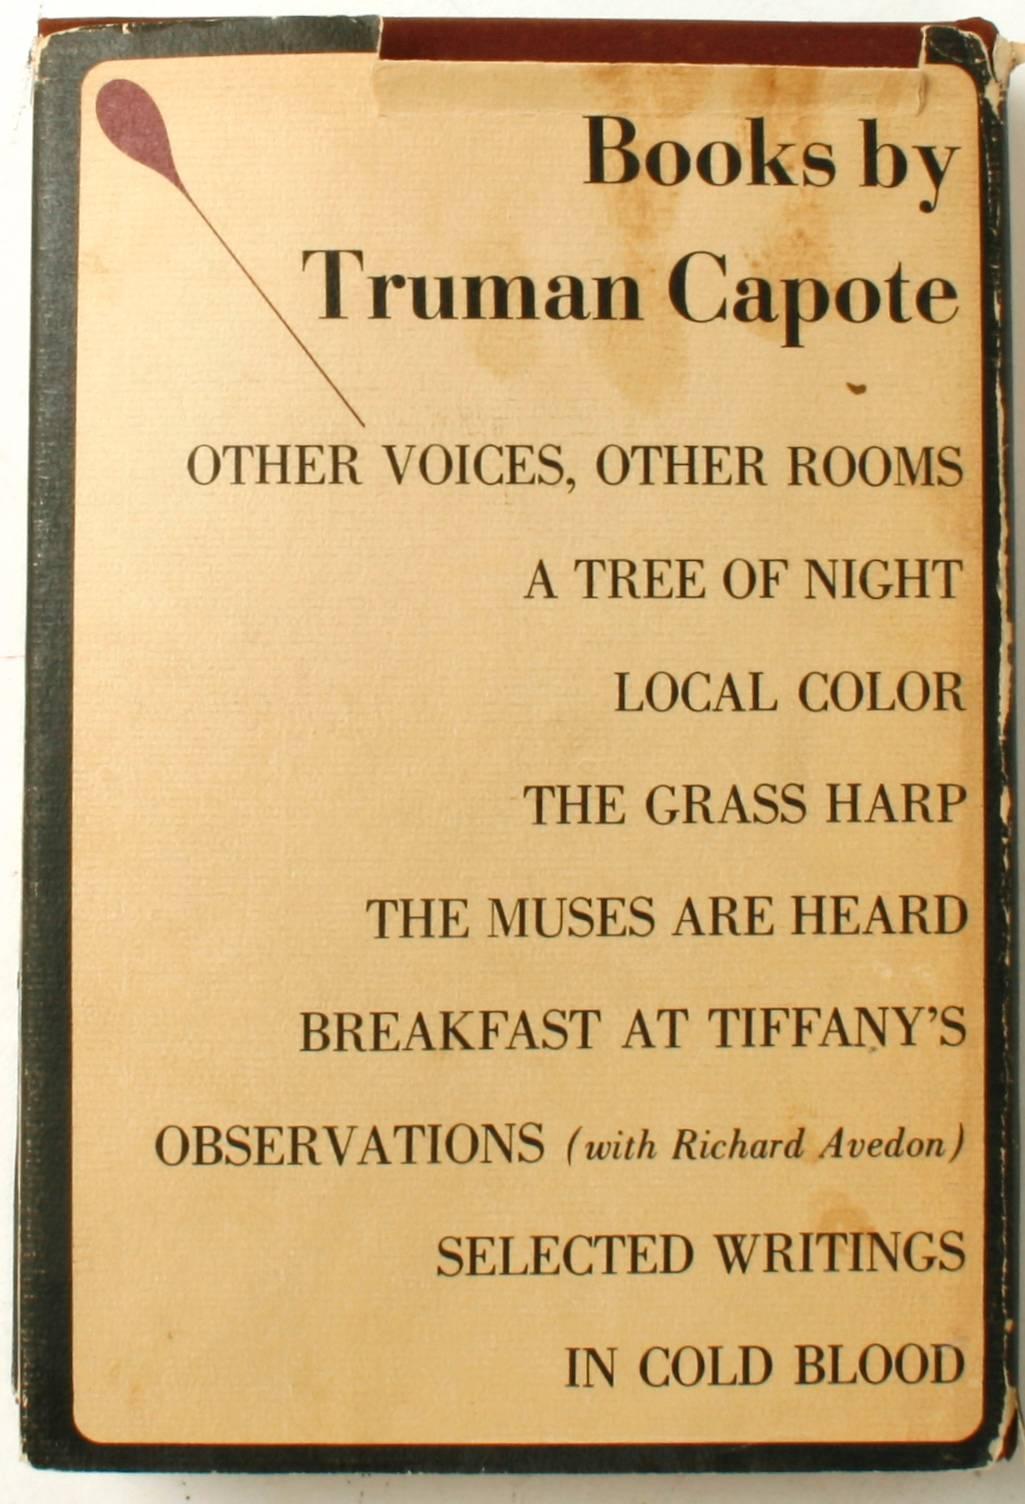 truman capote in cold blood first edition